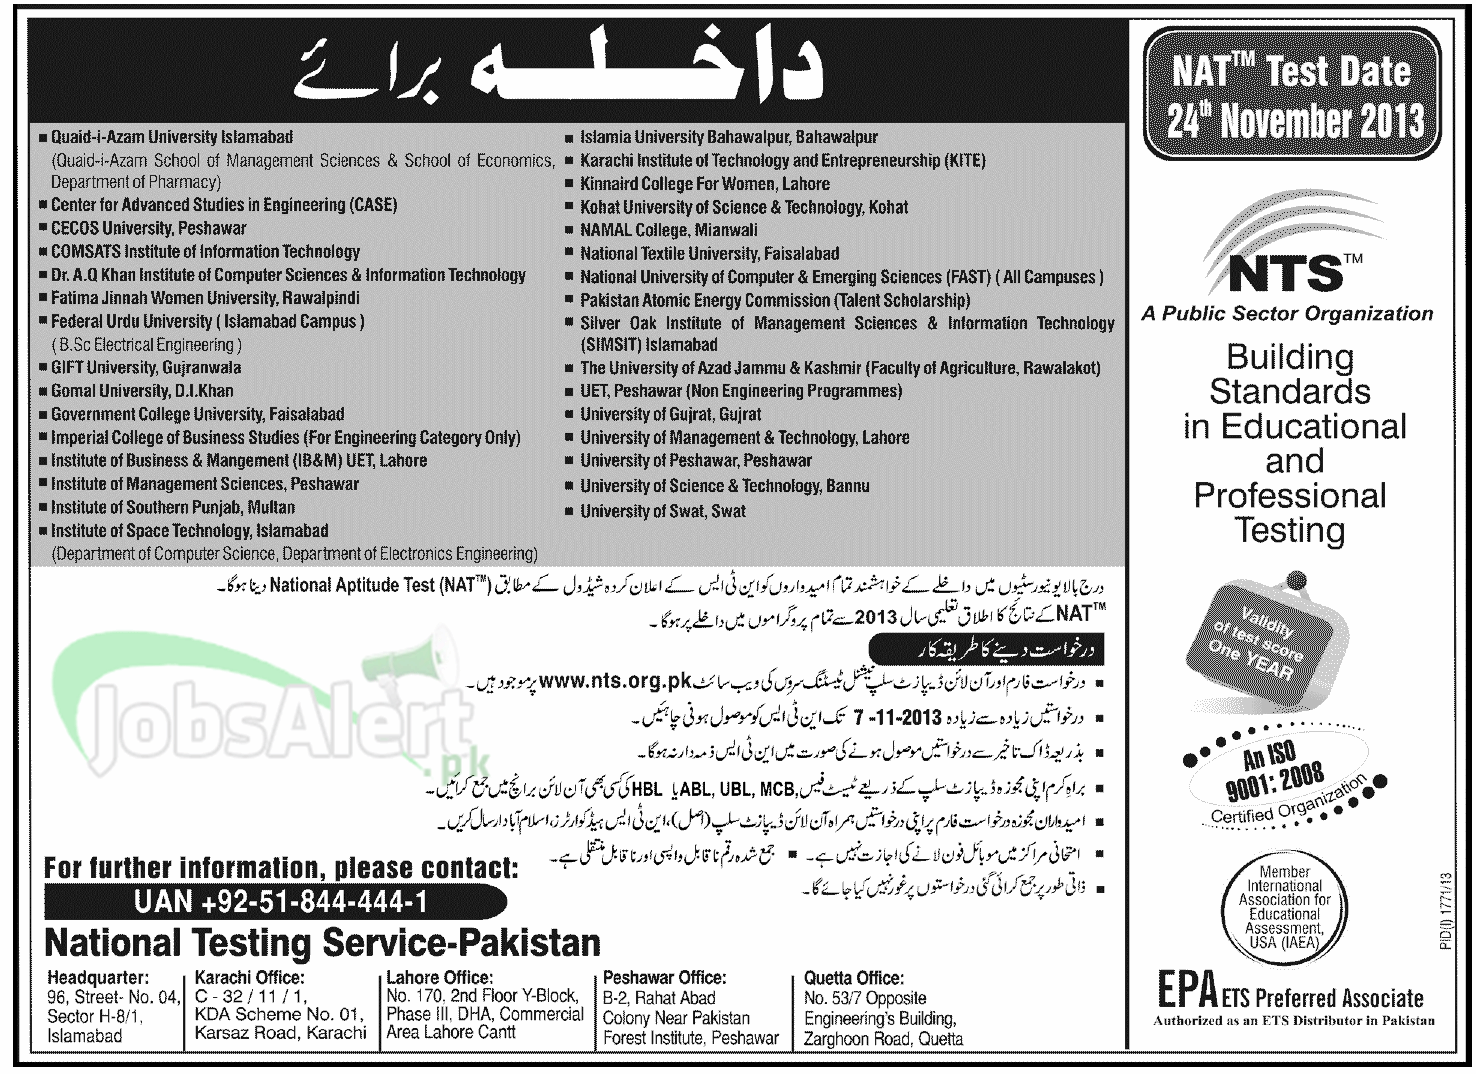 NTS (NAT) Test Admissions for Universities 2013